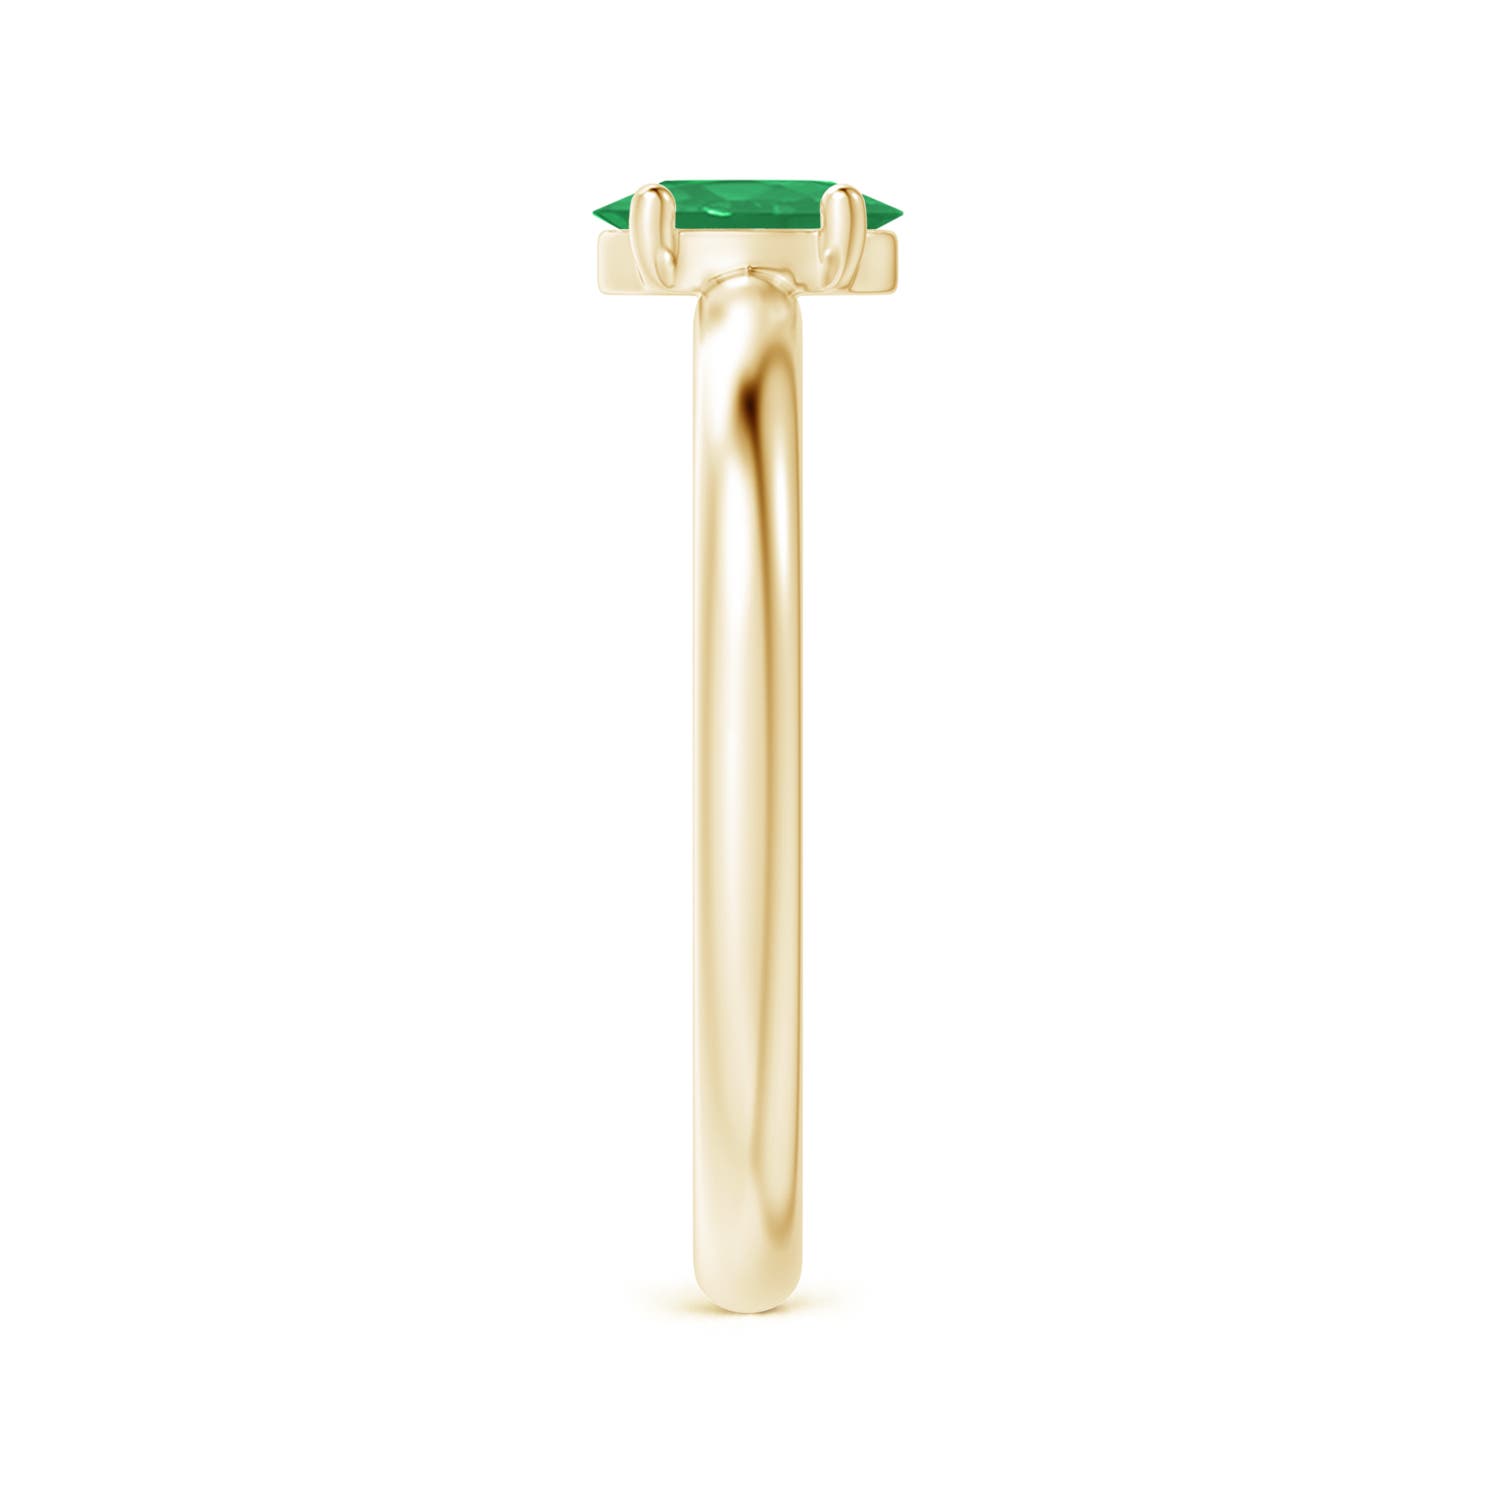 A - Emerald / 0.4 CT / 14 KT Yellow Gold